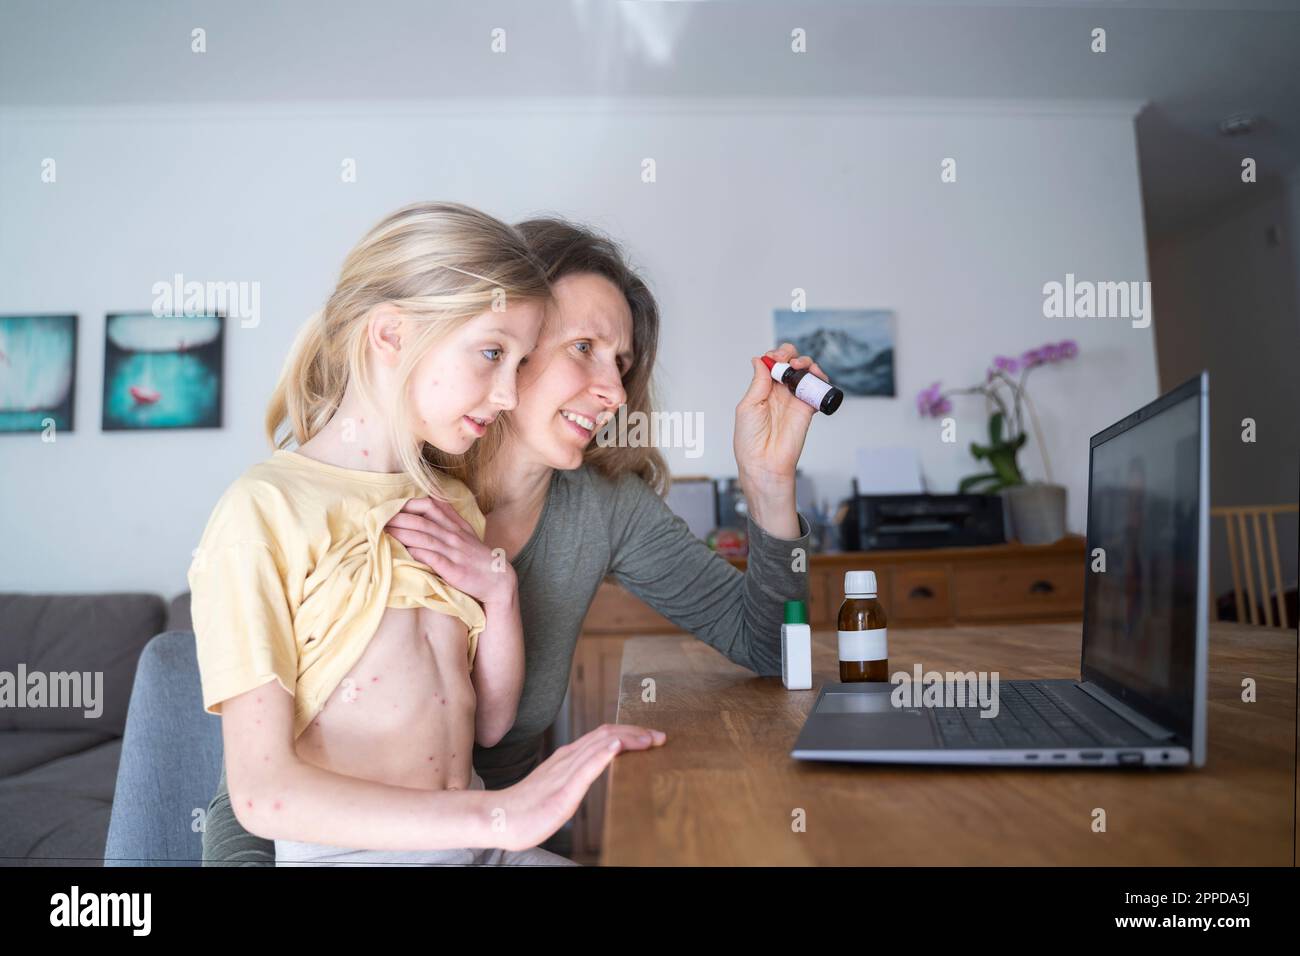 Girl with mother consulting doctor online Stock Photo